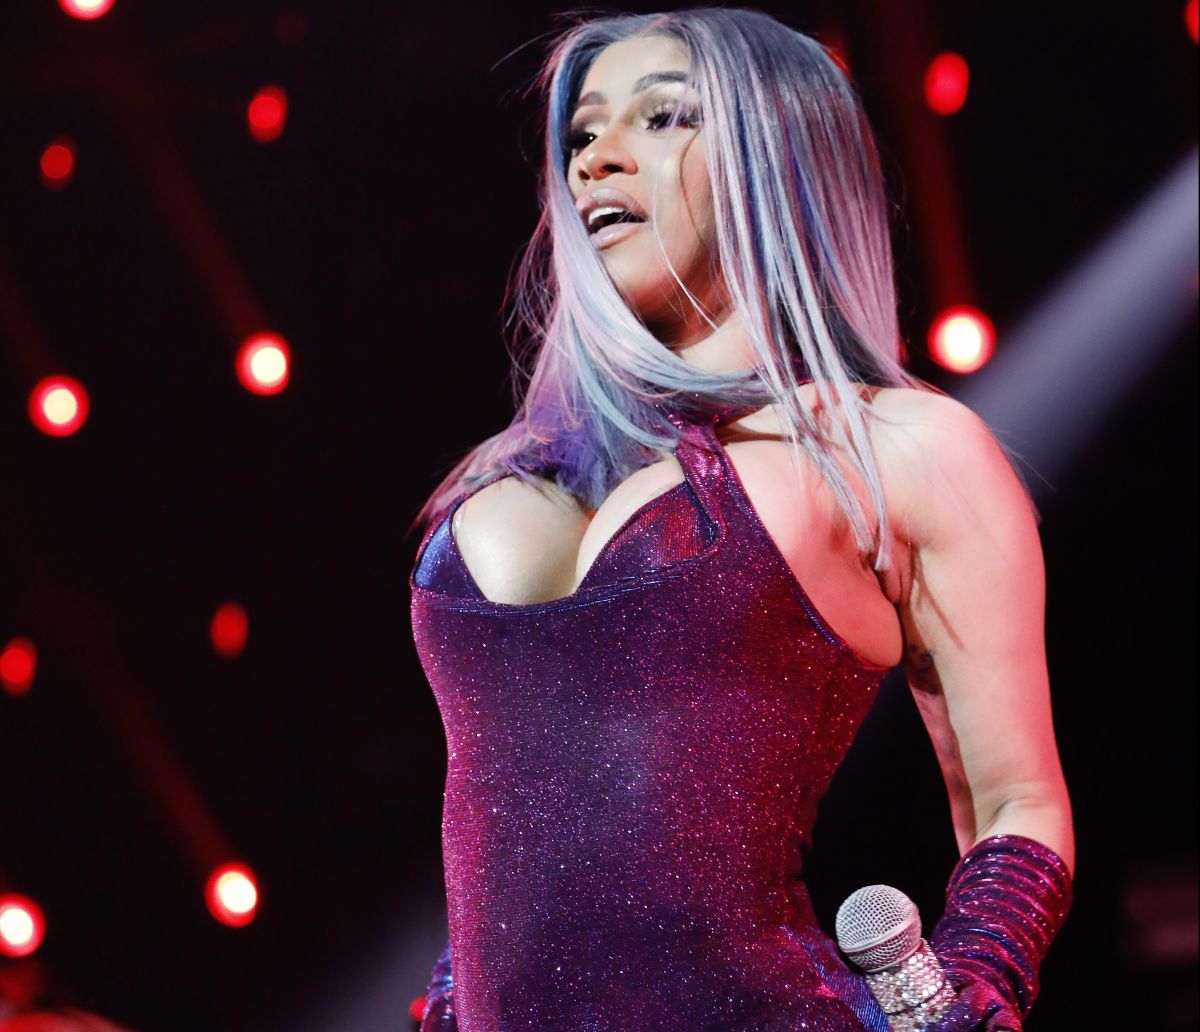 Cardi B has not had surgery to regain her figure after the birth of her second child